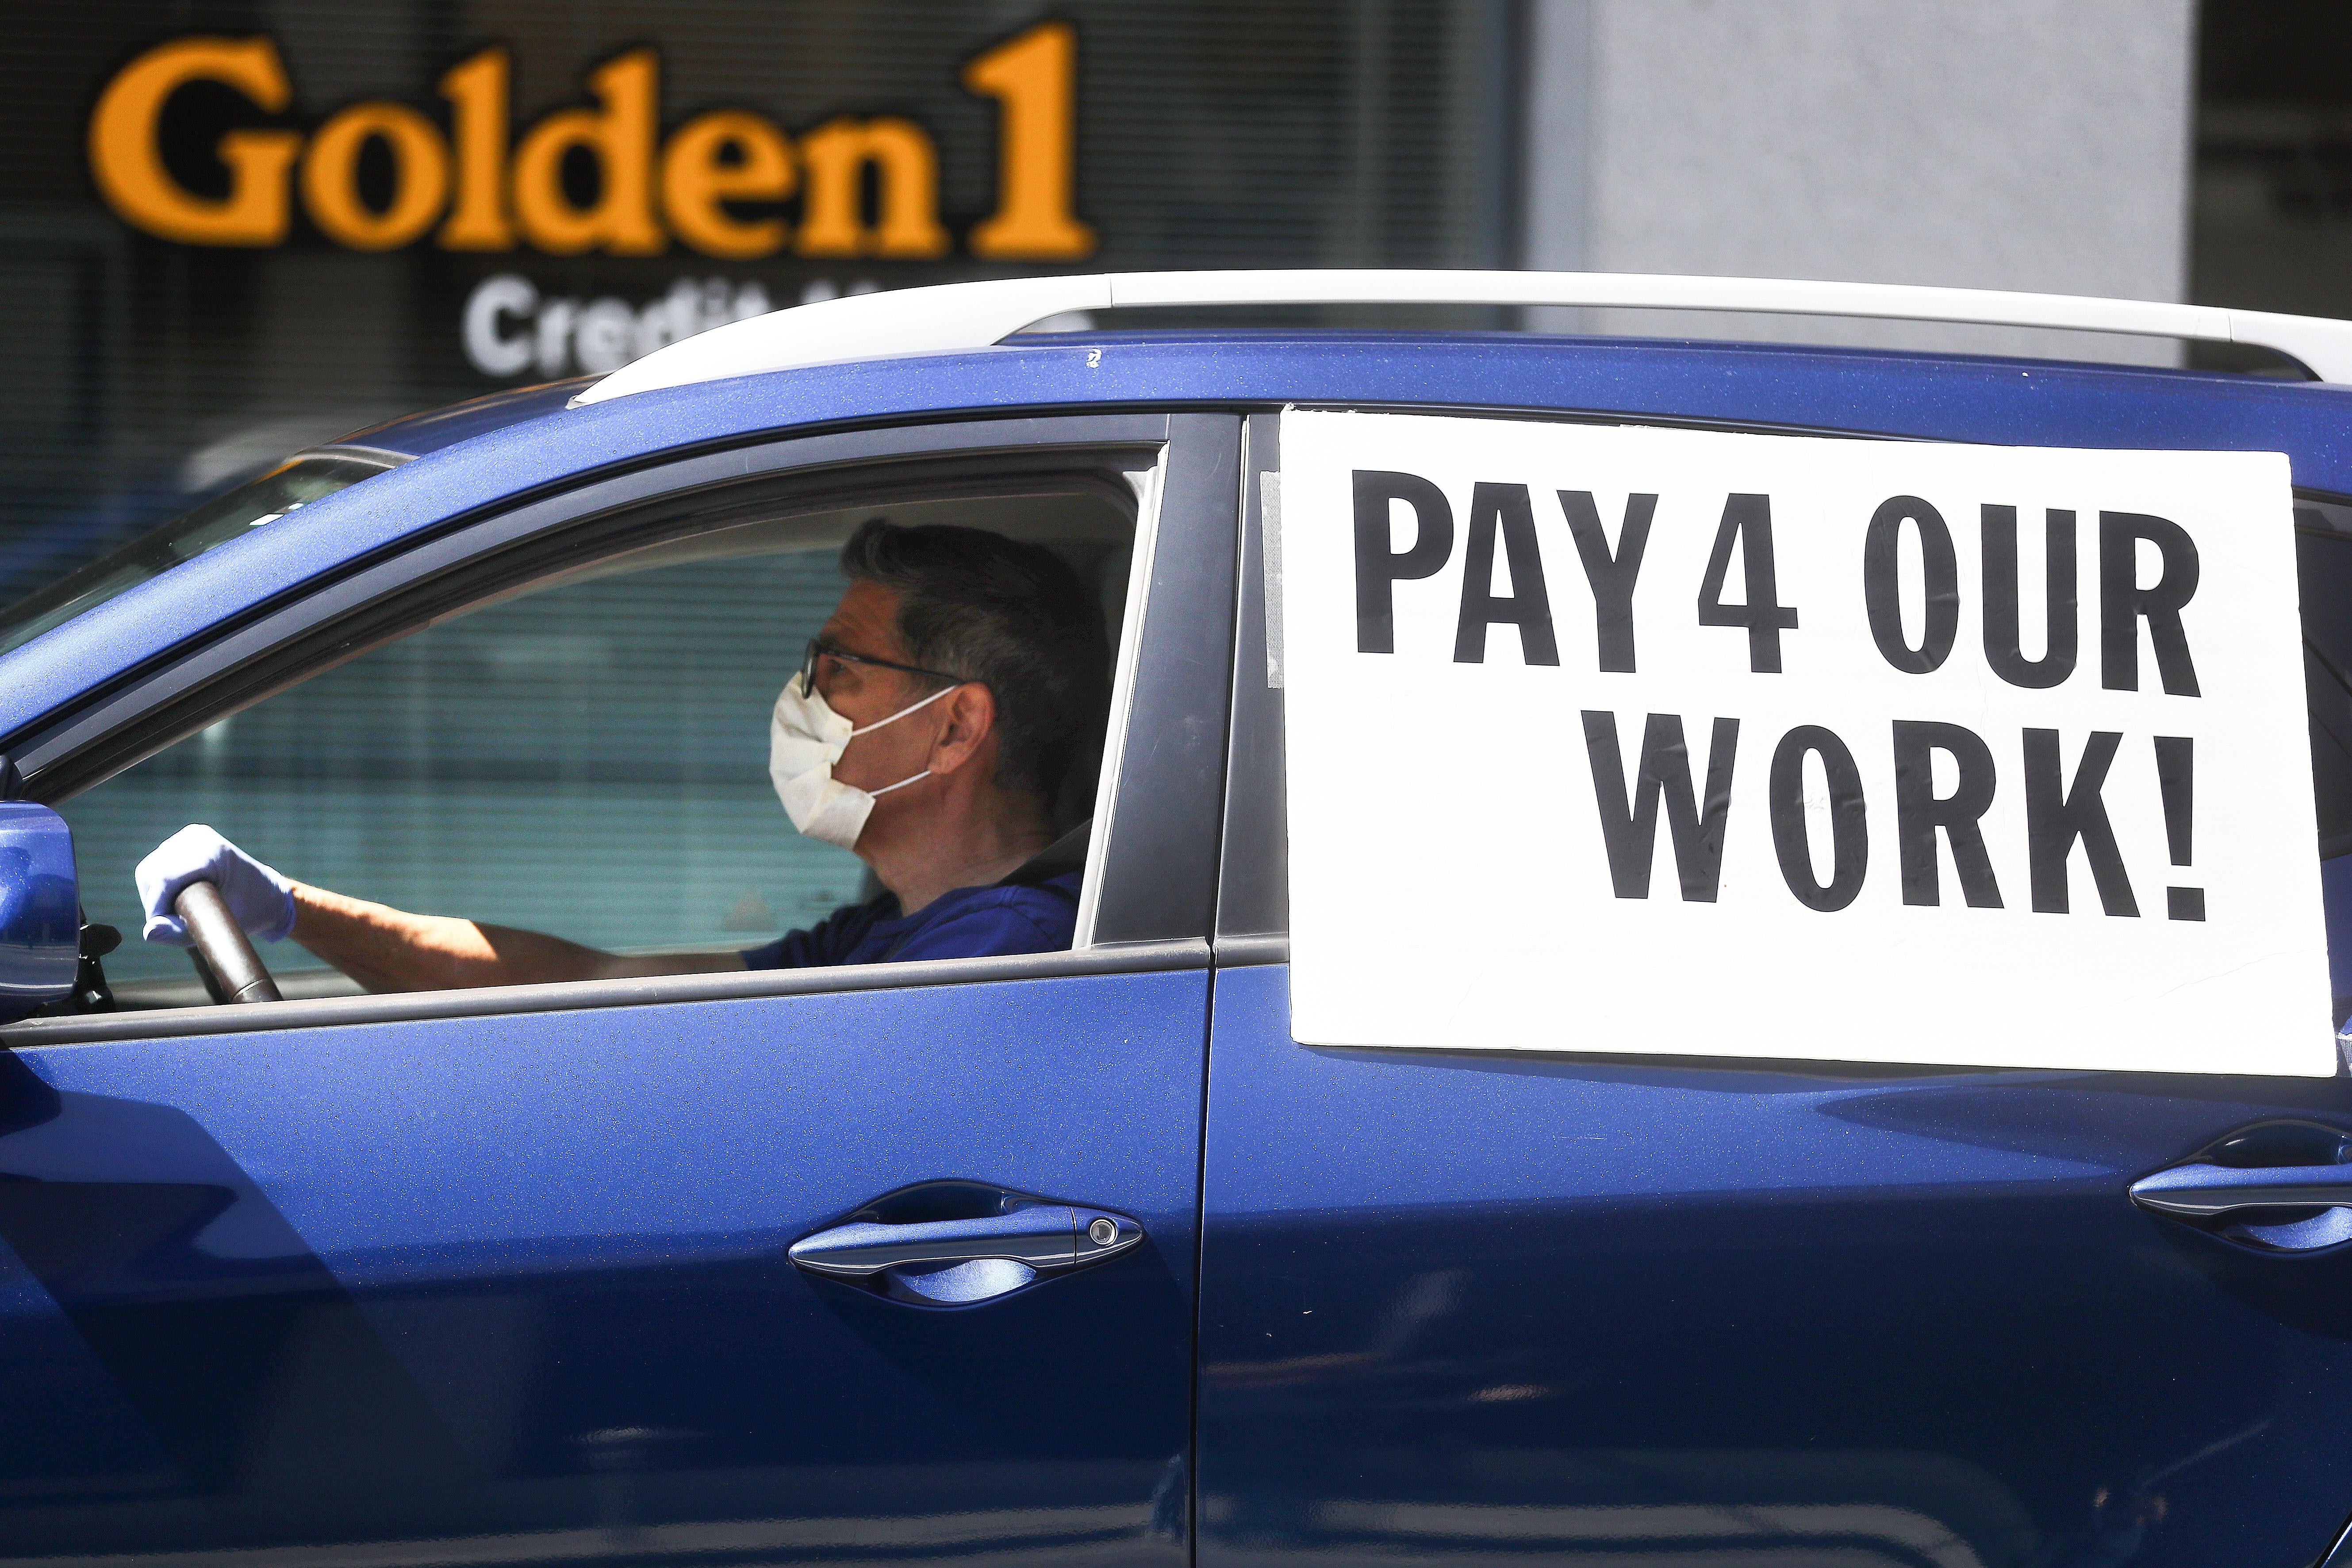 A driver wearing a face mask and gloves, in a car with a sign that says "Pay 4 Our Work!"